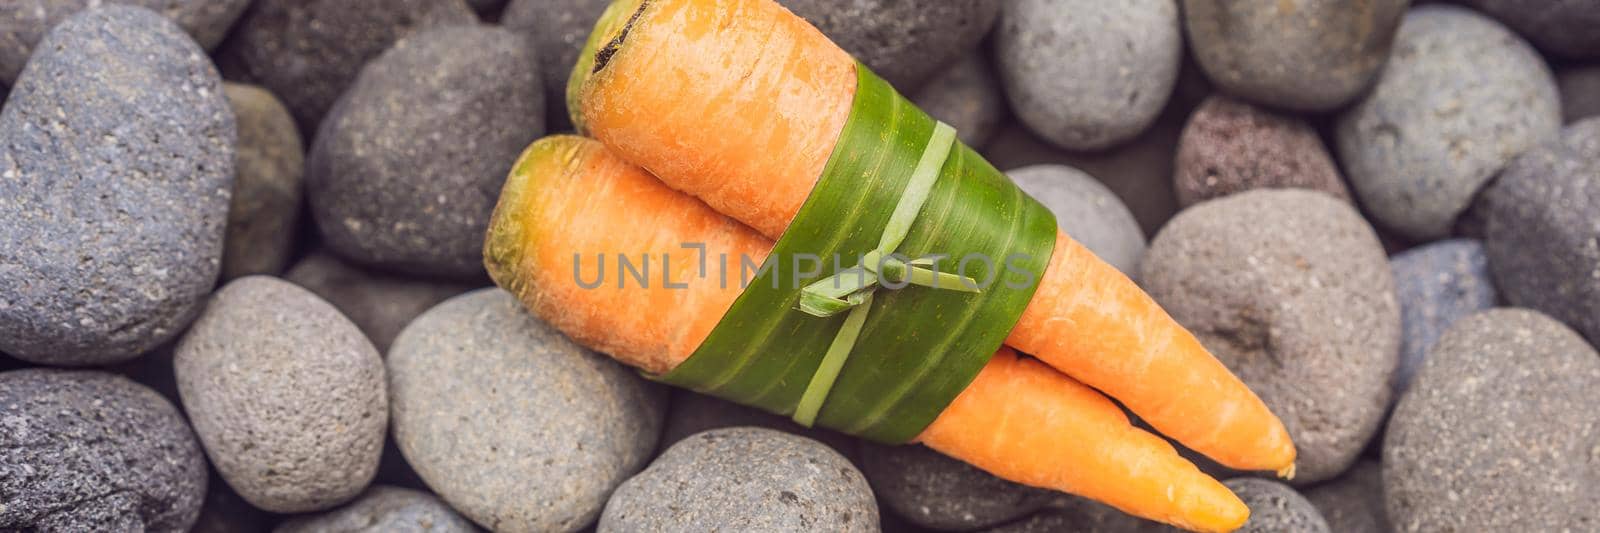 Eco-friendly product packaging concept. Carrot wrapped in a banana leaf, as an alternative to a plastic bag. Zero waste concept. Alternative packaging. BANNER, LONG FORMAT